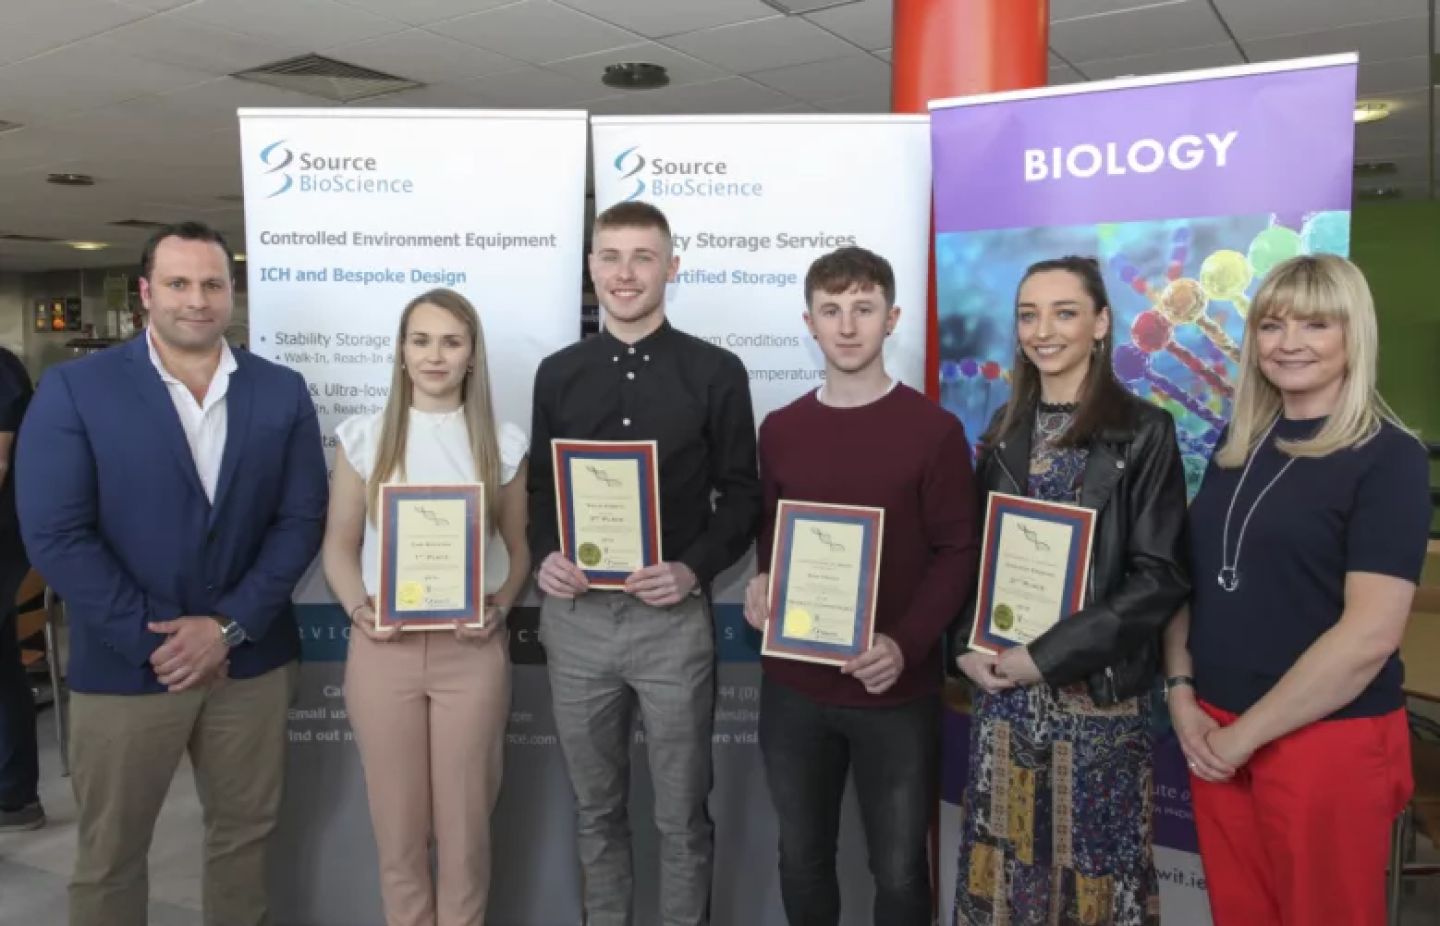 Source bioscience awards for excellence in level 7 undergraduate biology research